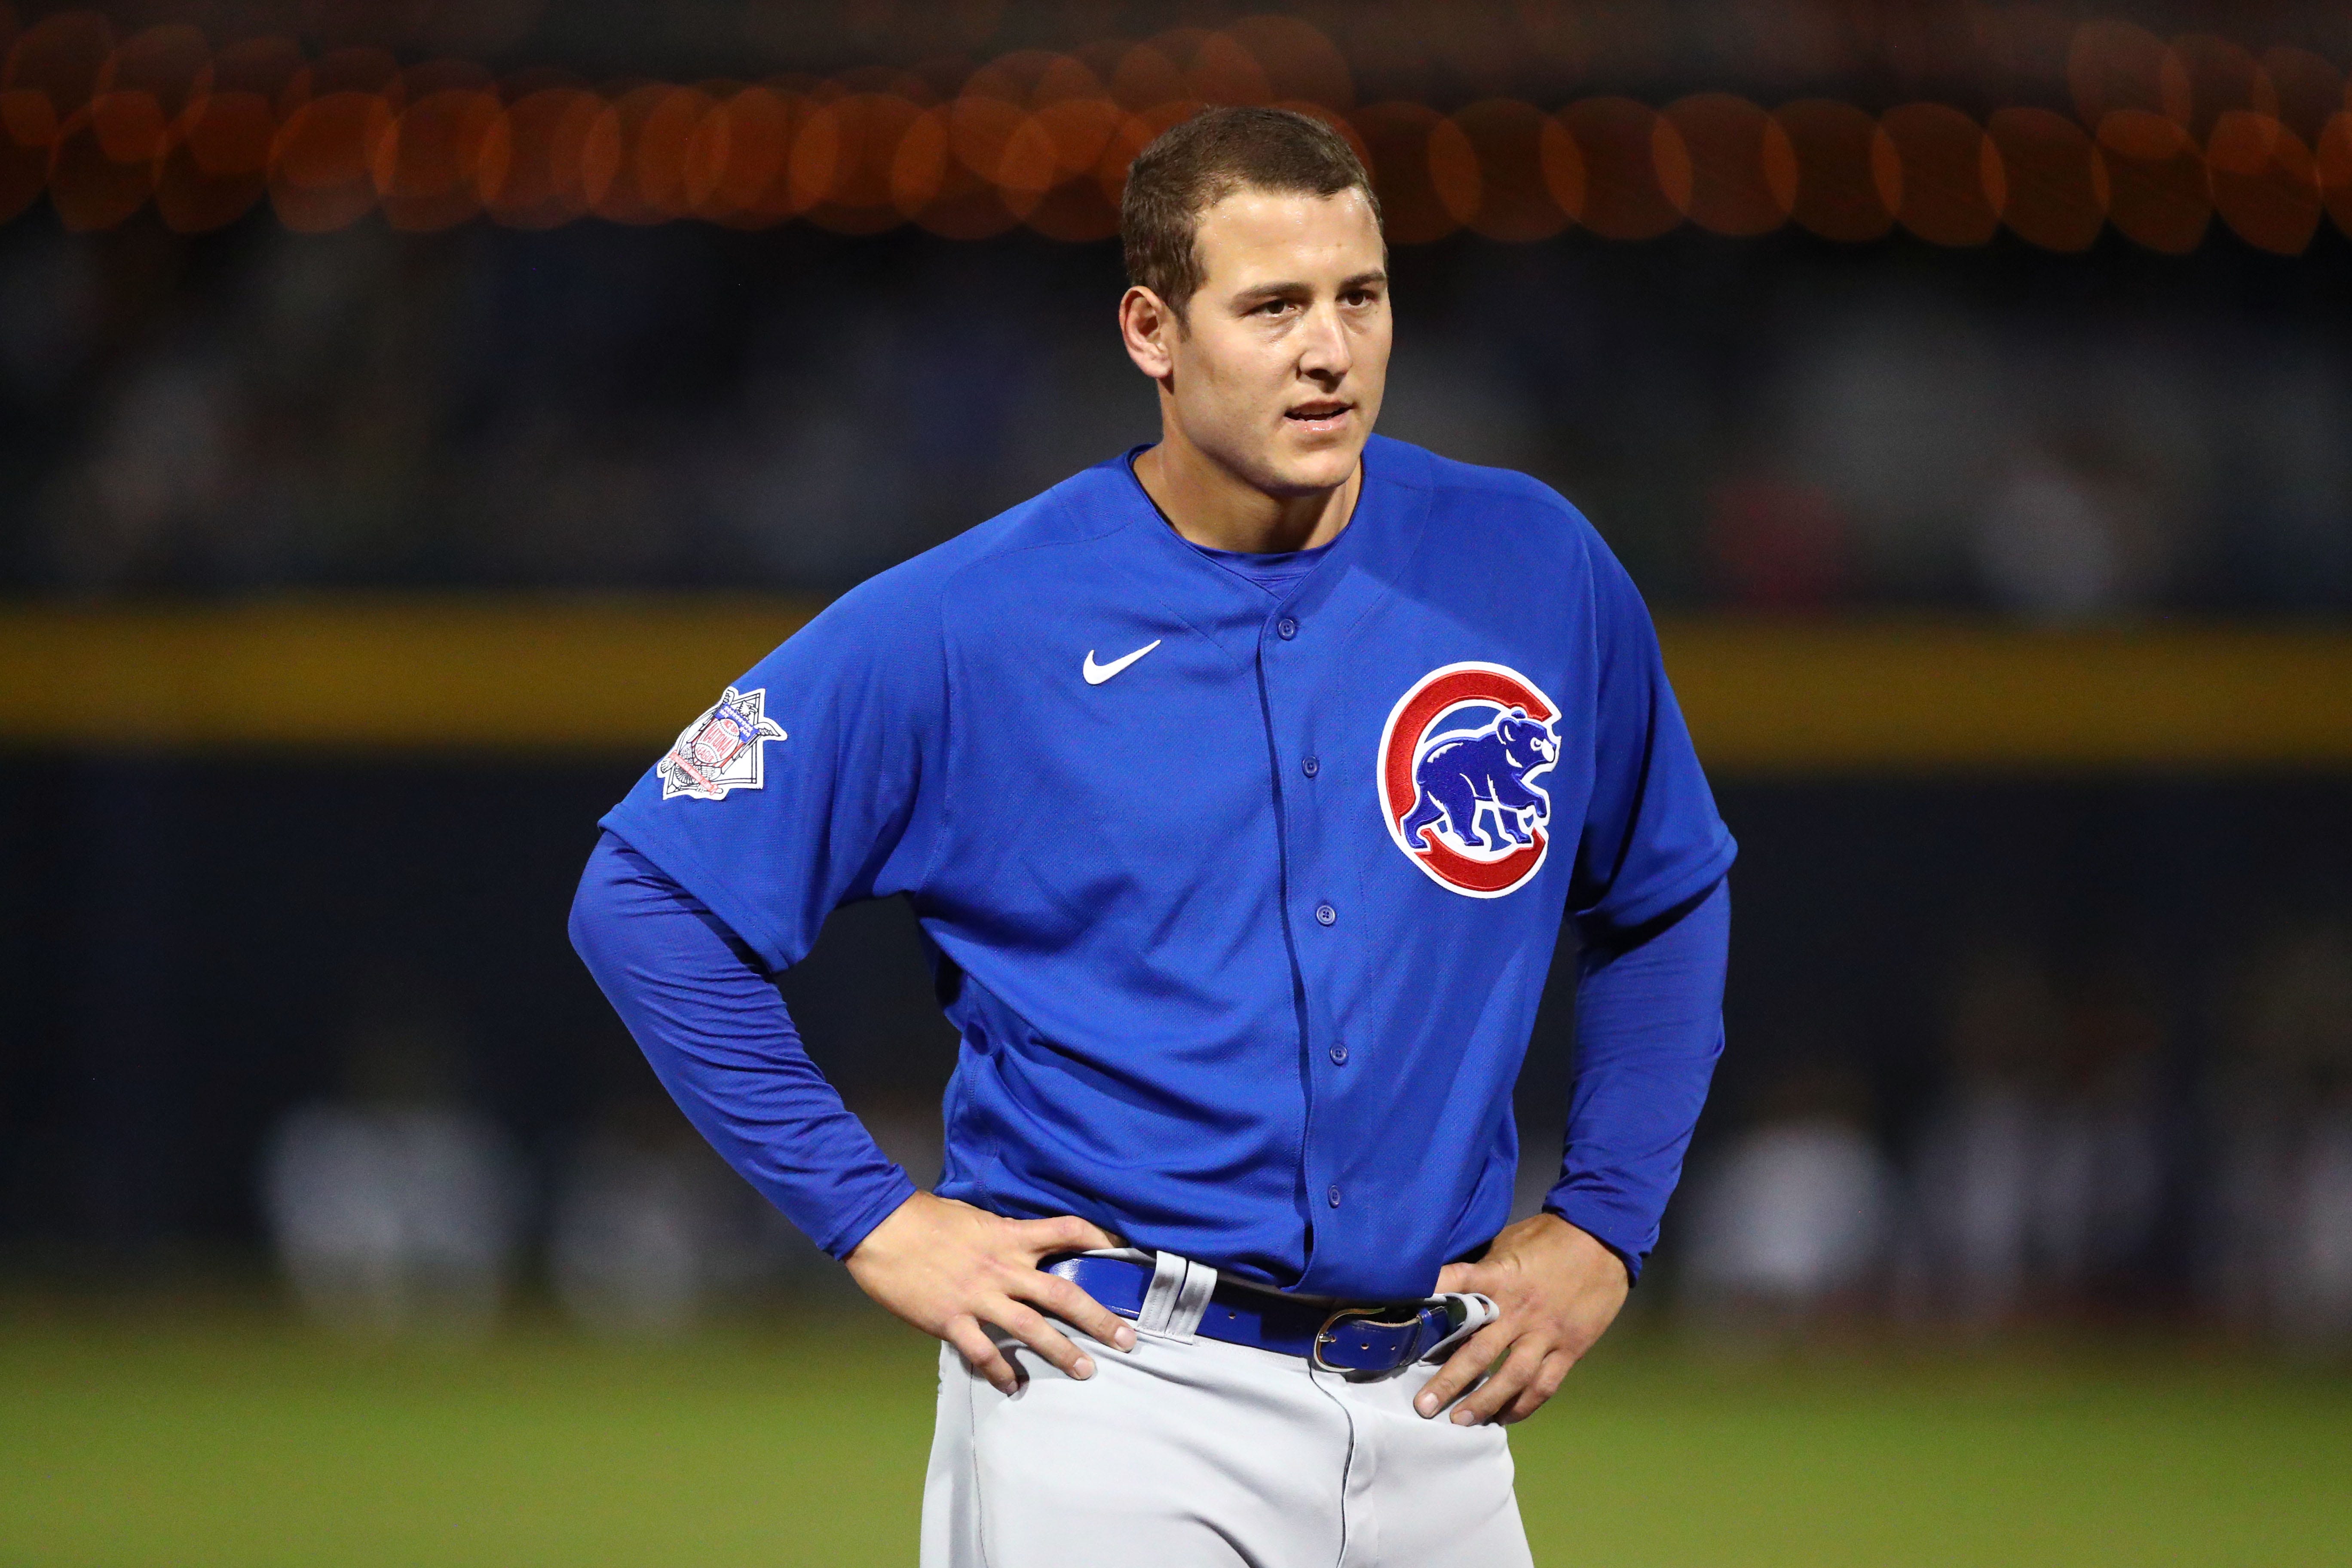 anthony rizzo cubs jersey